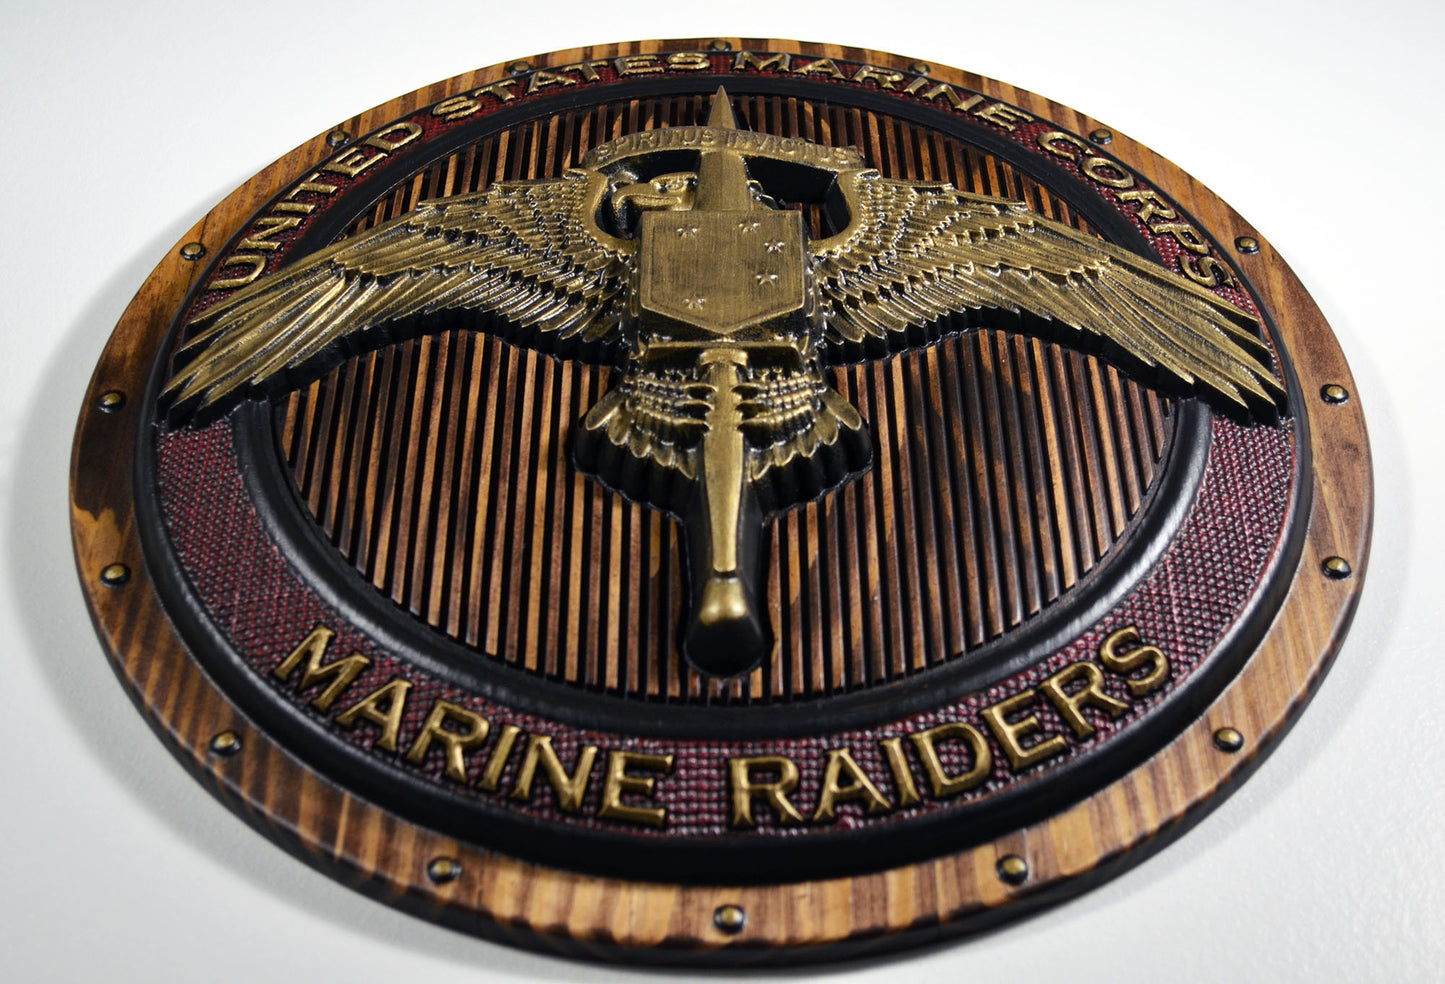 USMC Marine Raiders Badge on Shield, Marine Special Operations, 3d CNC wood carving, painted military plaque